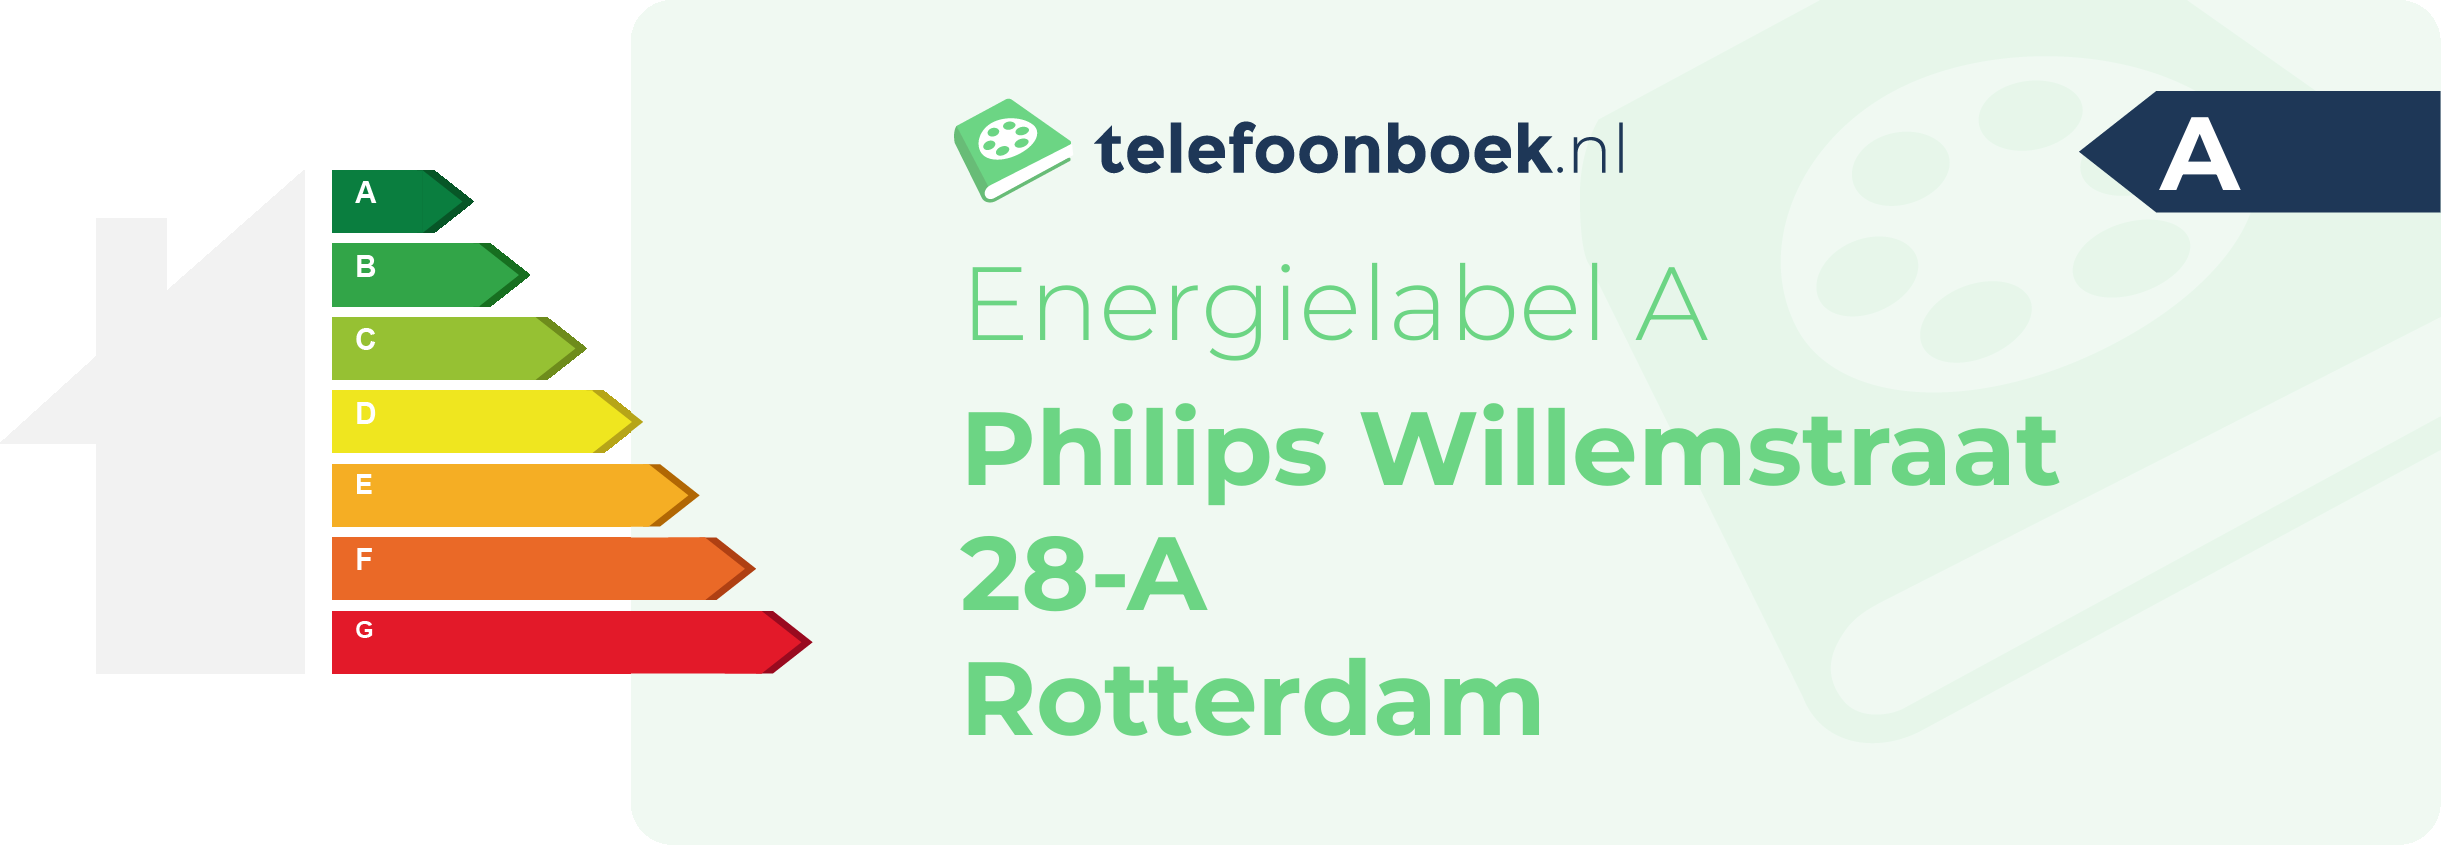 Energielabel Philips Willemstraat 28-A Rotterdam